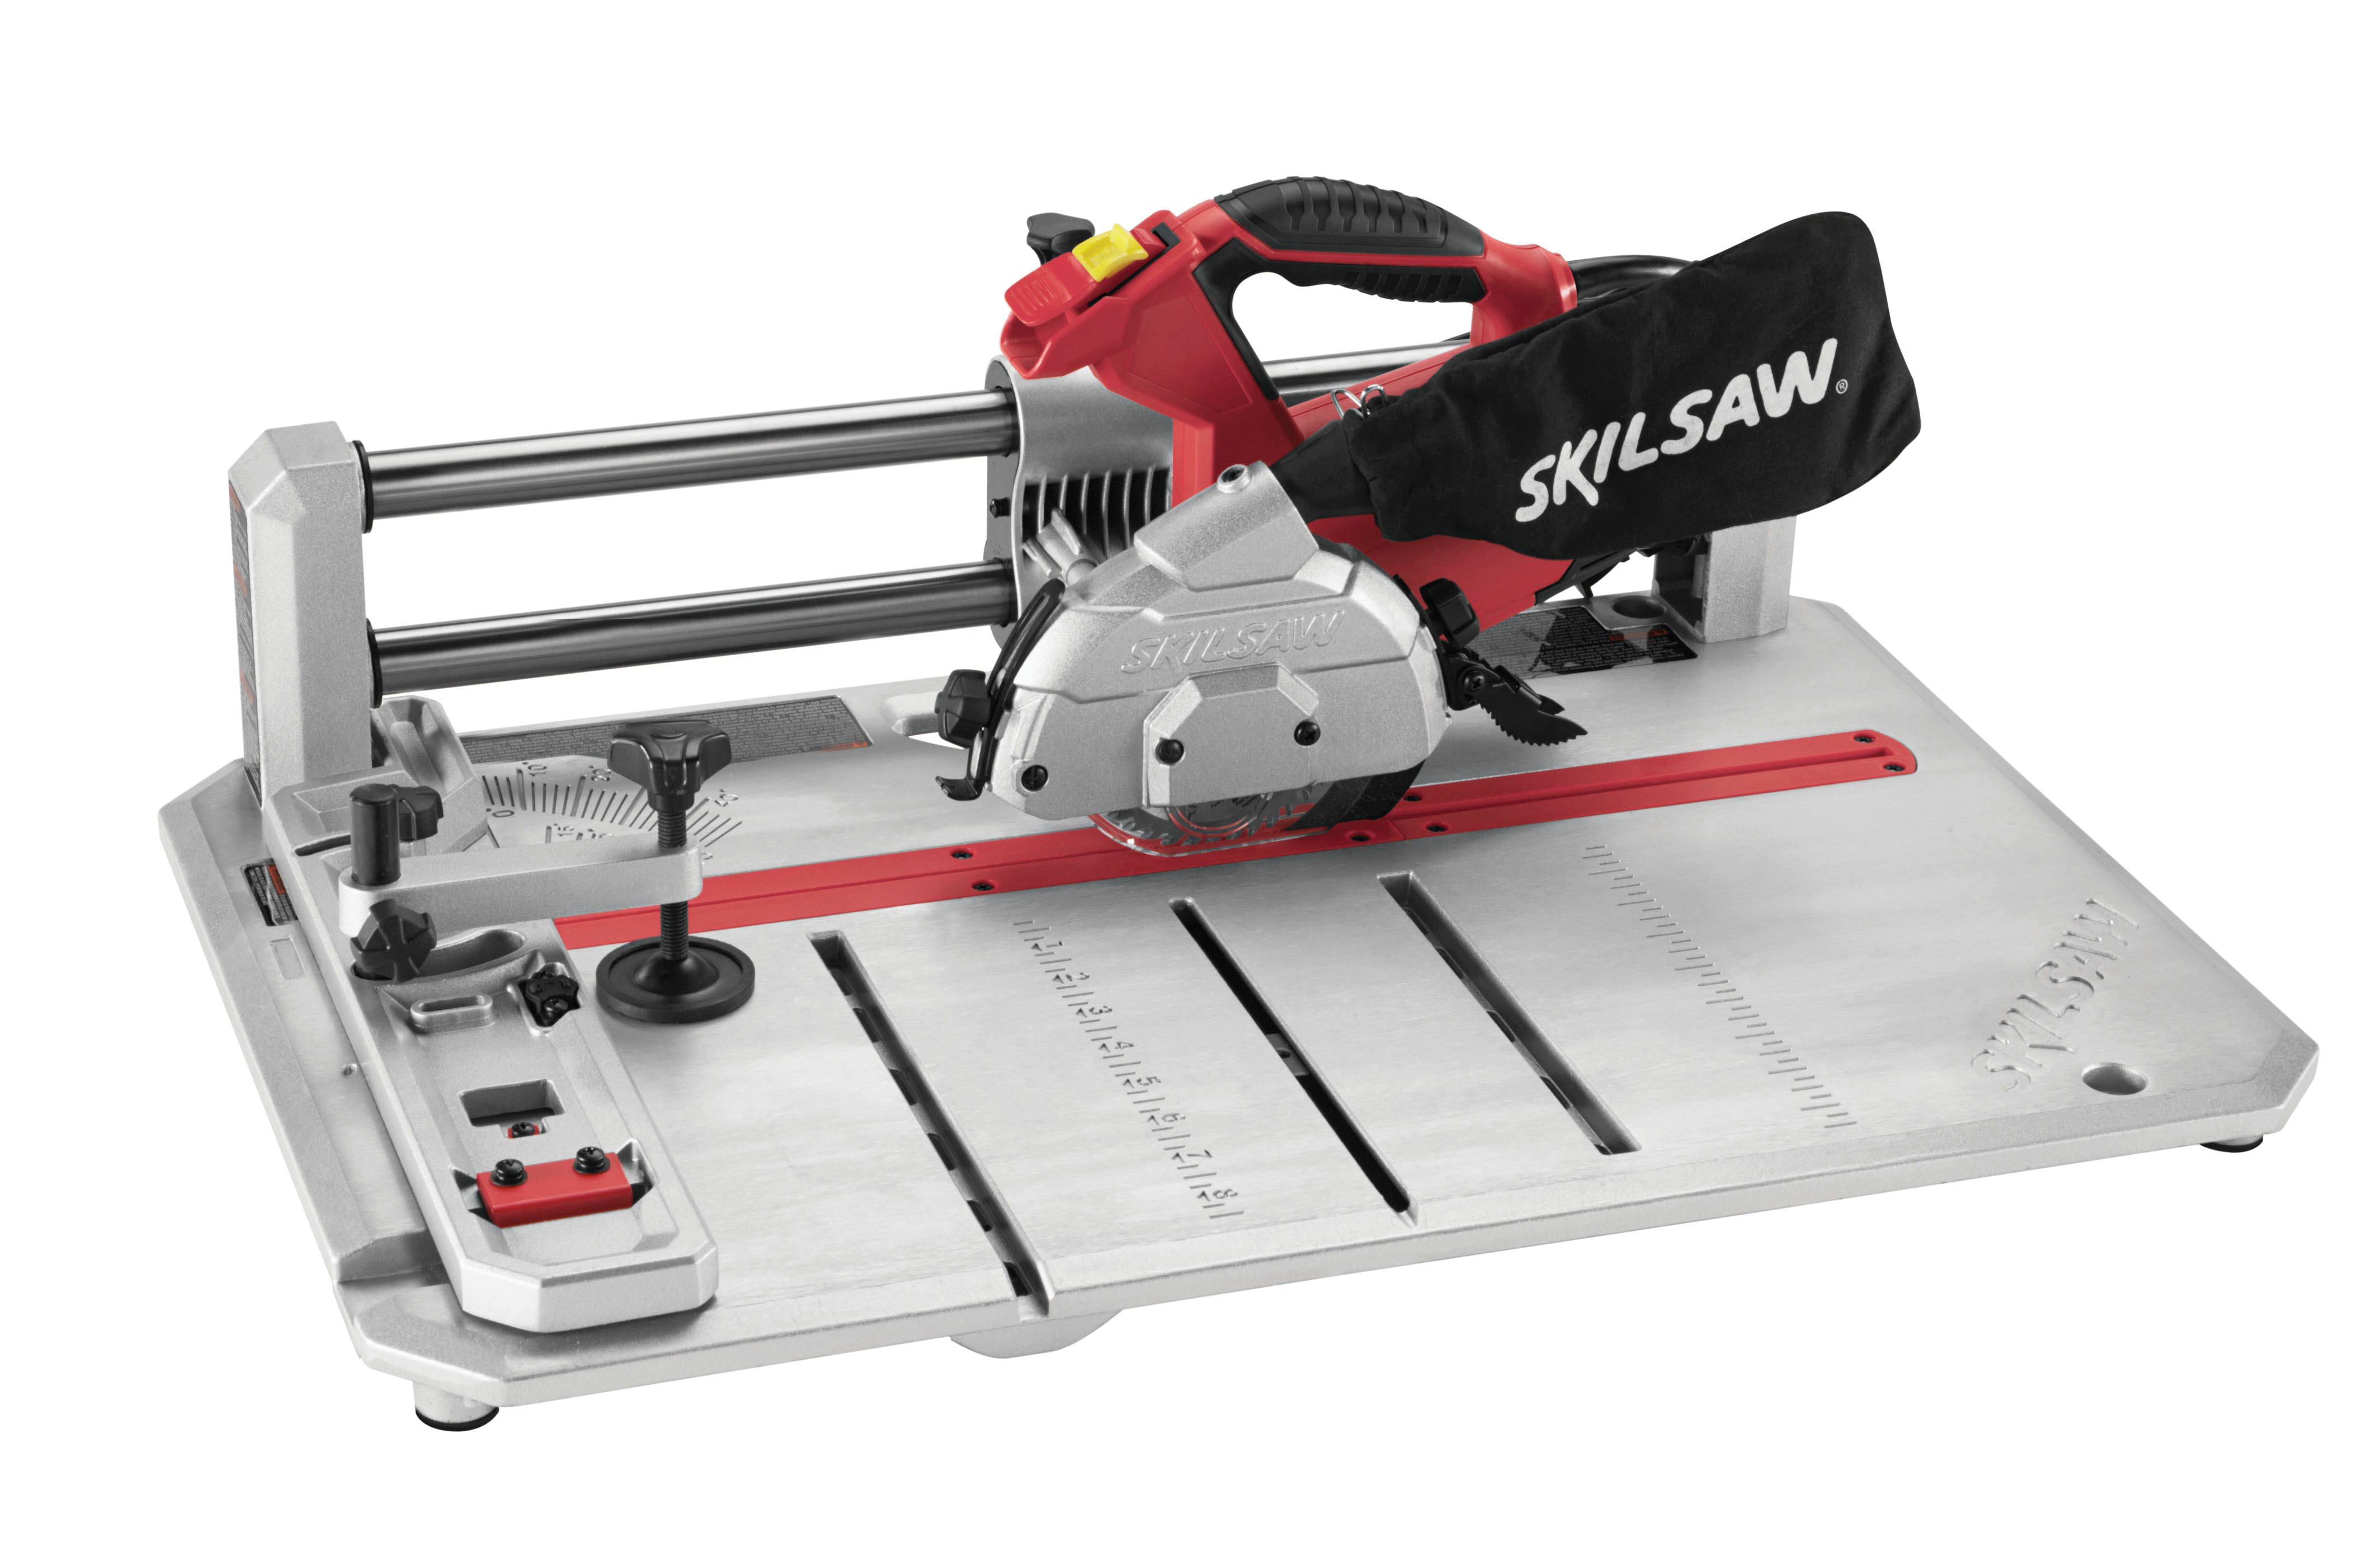 SKIL 3601-02 7-Amp Corded Electric Flooring Saw with 36T Contractor Blade - image 1 of 8